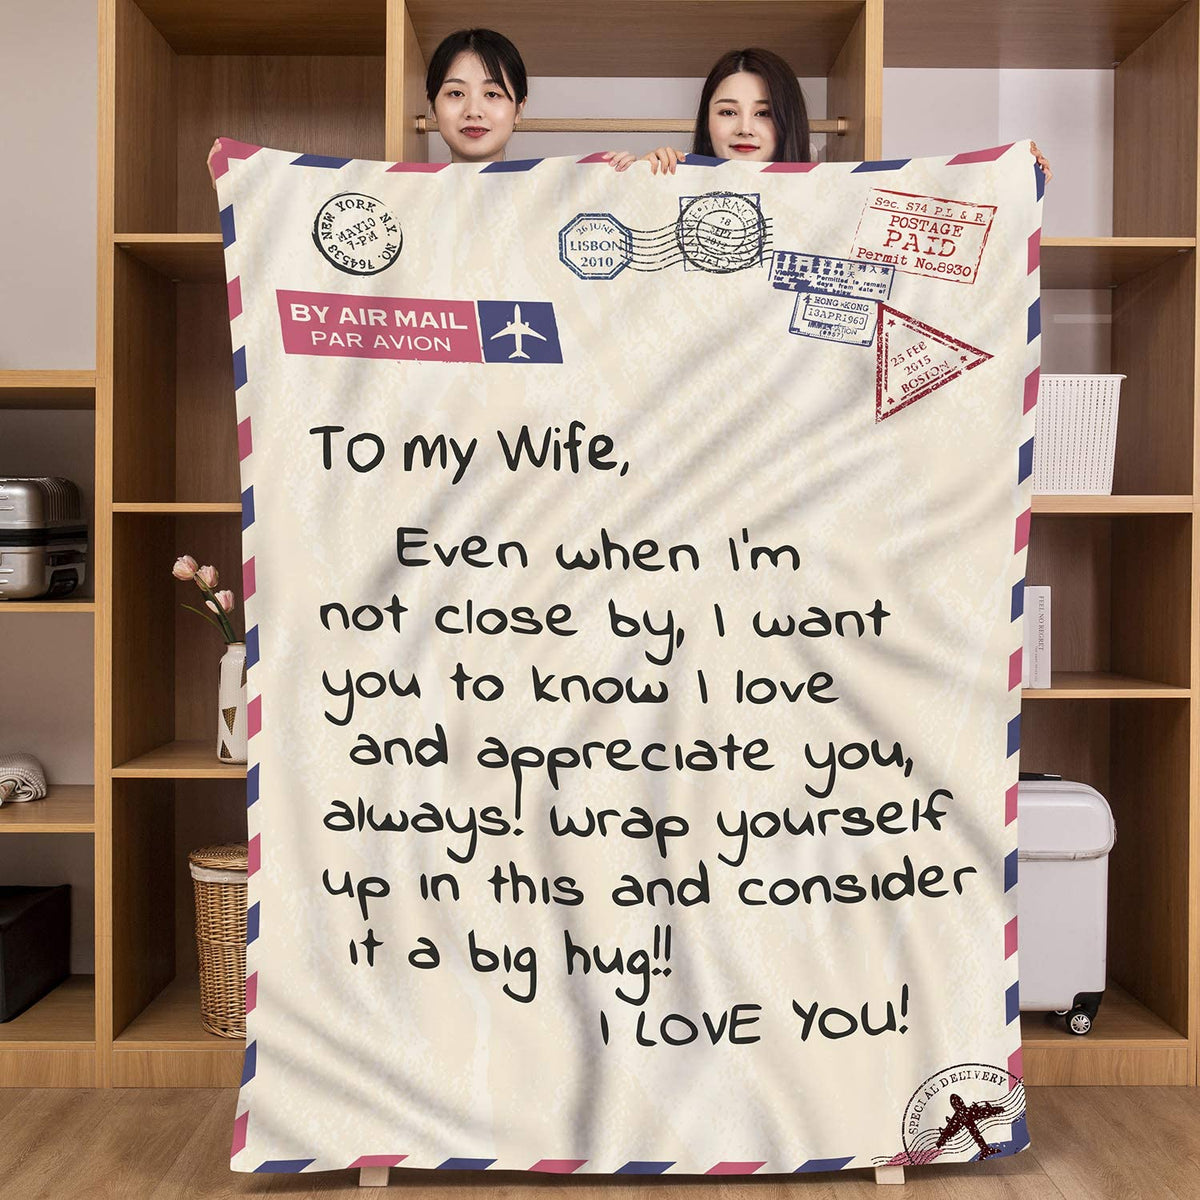 Valentines Day Blankets To My Wife Throw Blanket For Wife Best Wife Blanket To My Wife Throw Blanket For My Wife Blanket From Husband To Wife